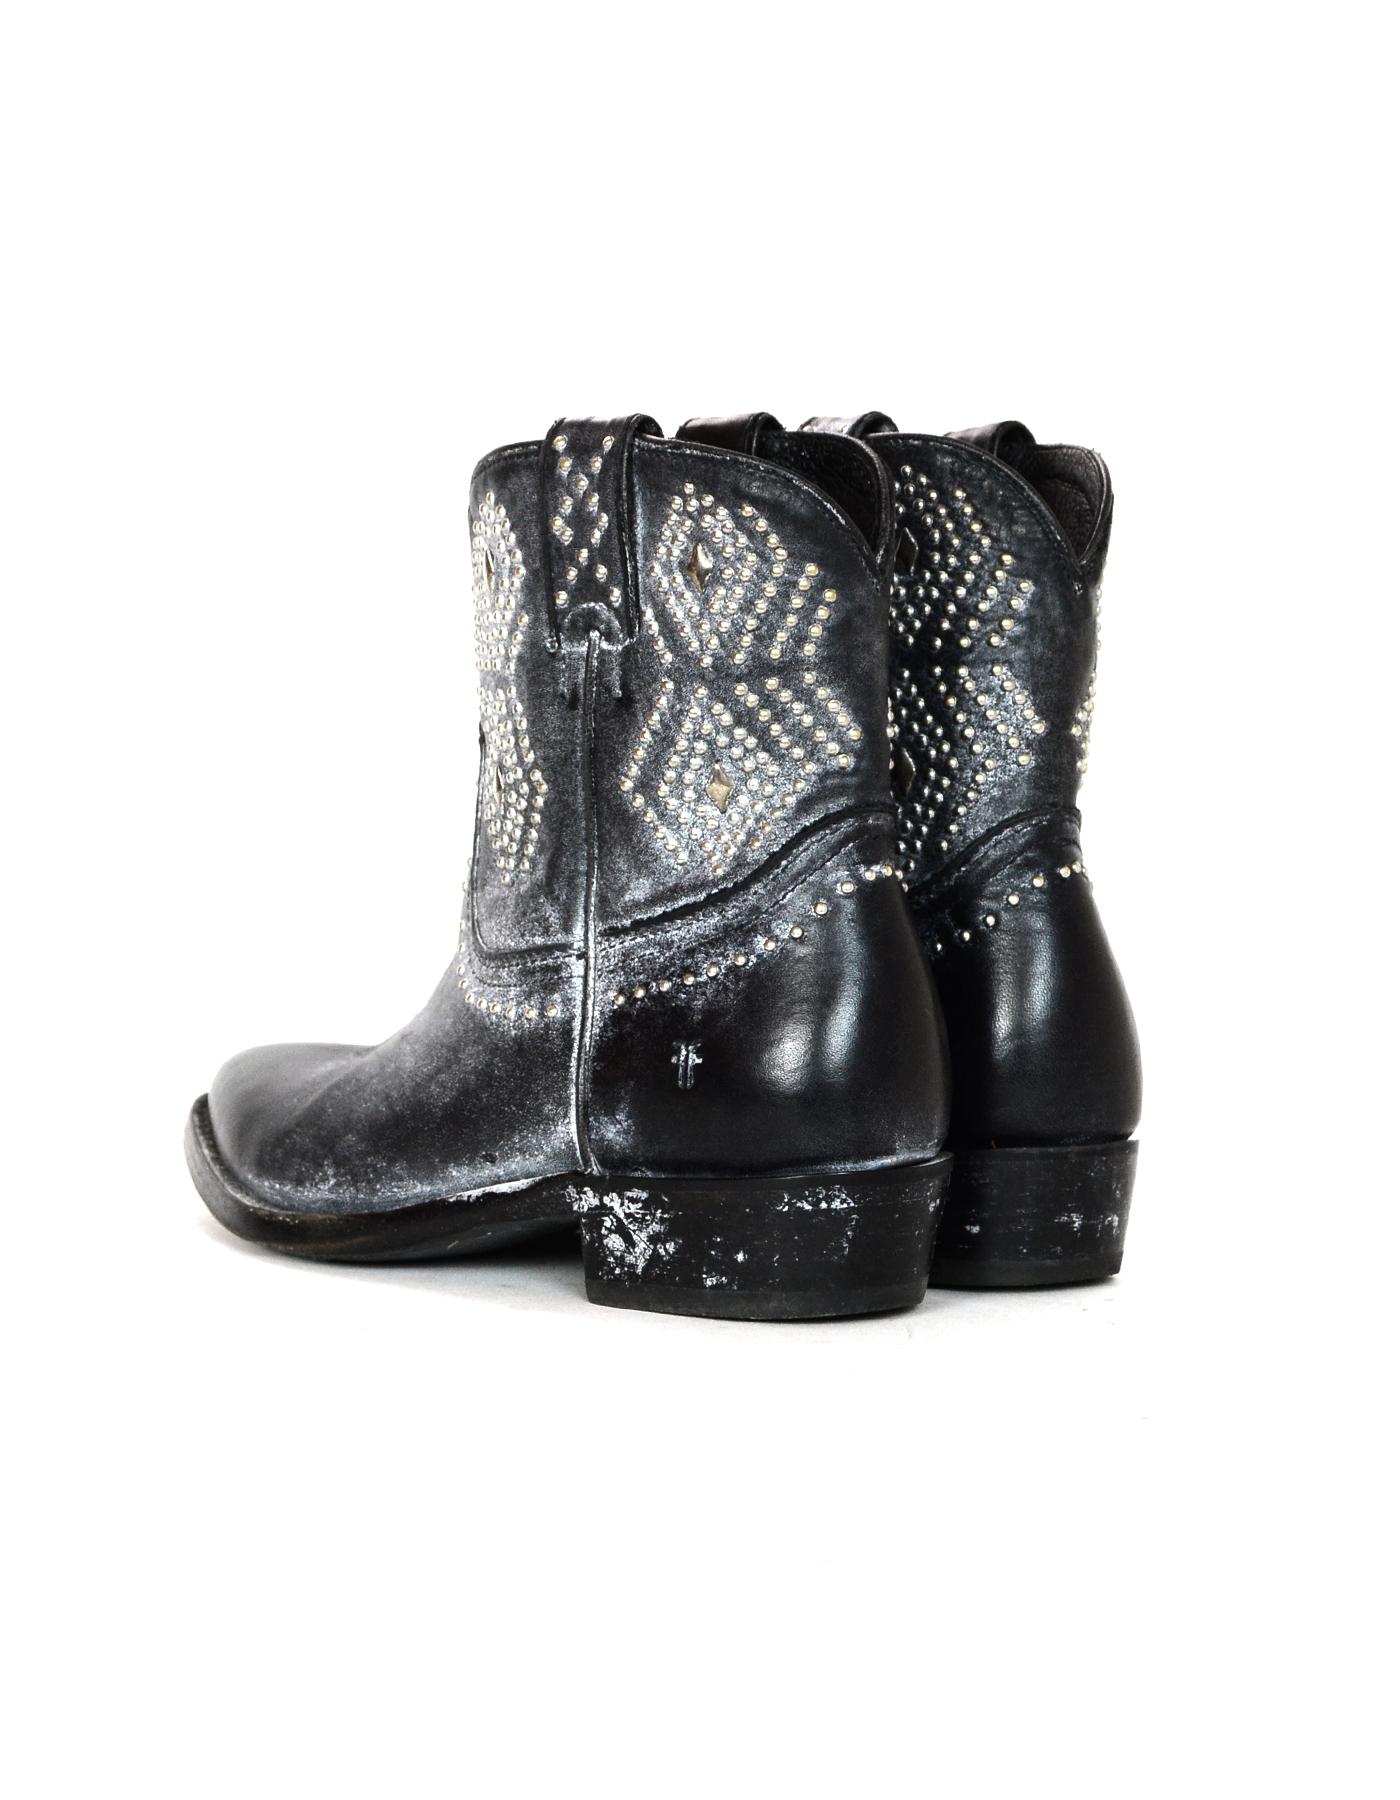 Frye Black Leather Billy Studded Short Boots Sz 5.5 In Excellent Condition In New York, NY